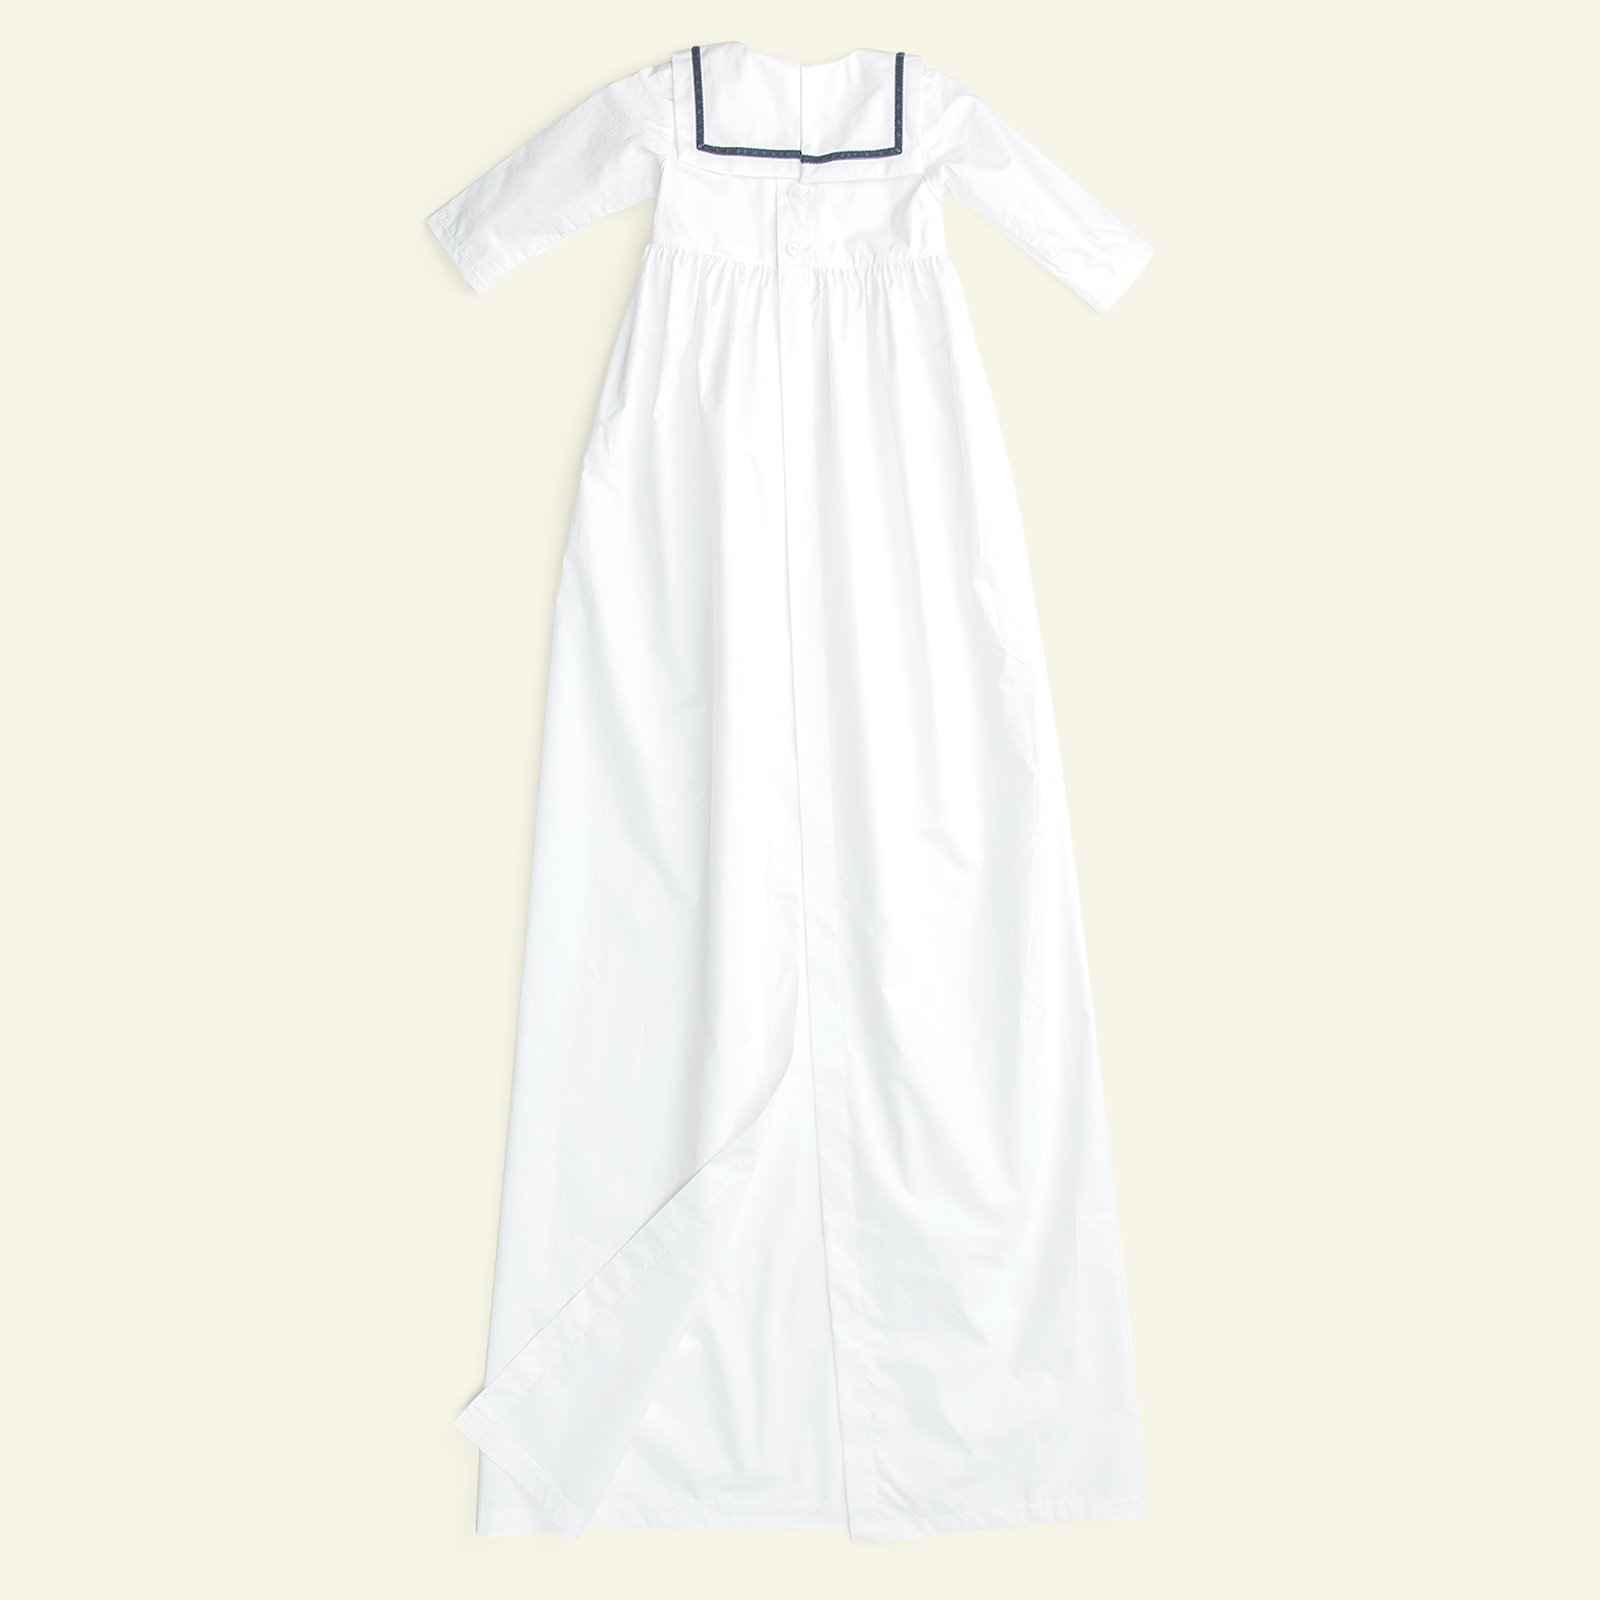 Own designed christening gown, 68/6m p83018_26023_540111_pack_b